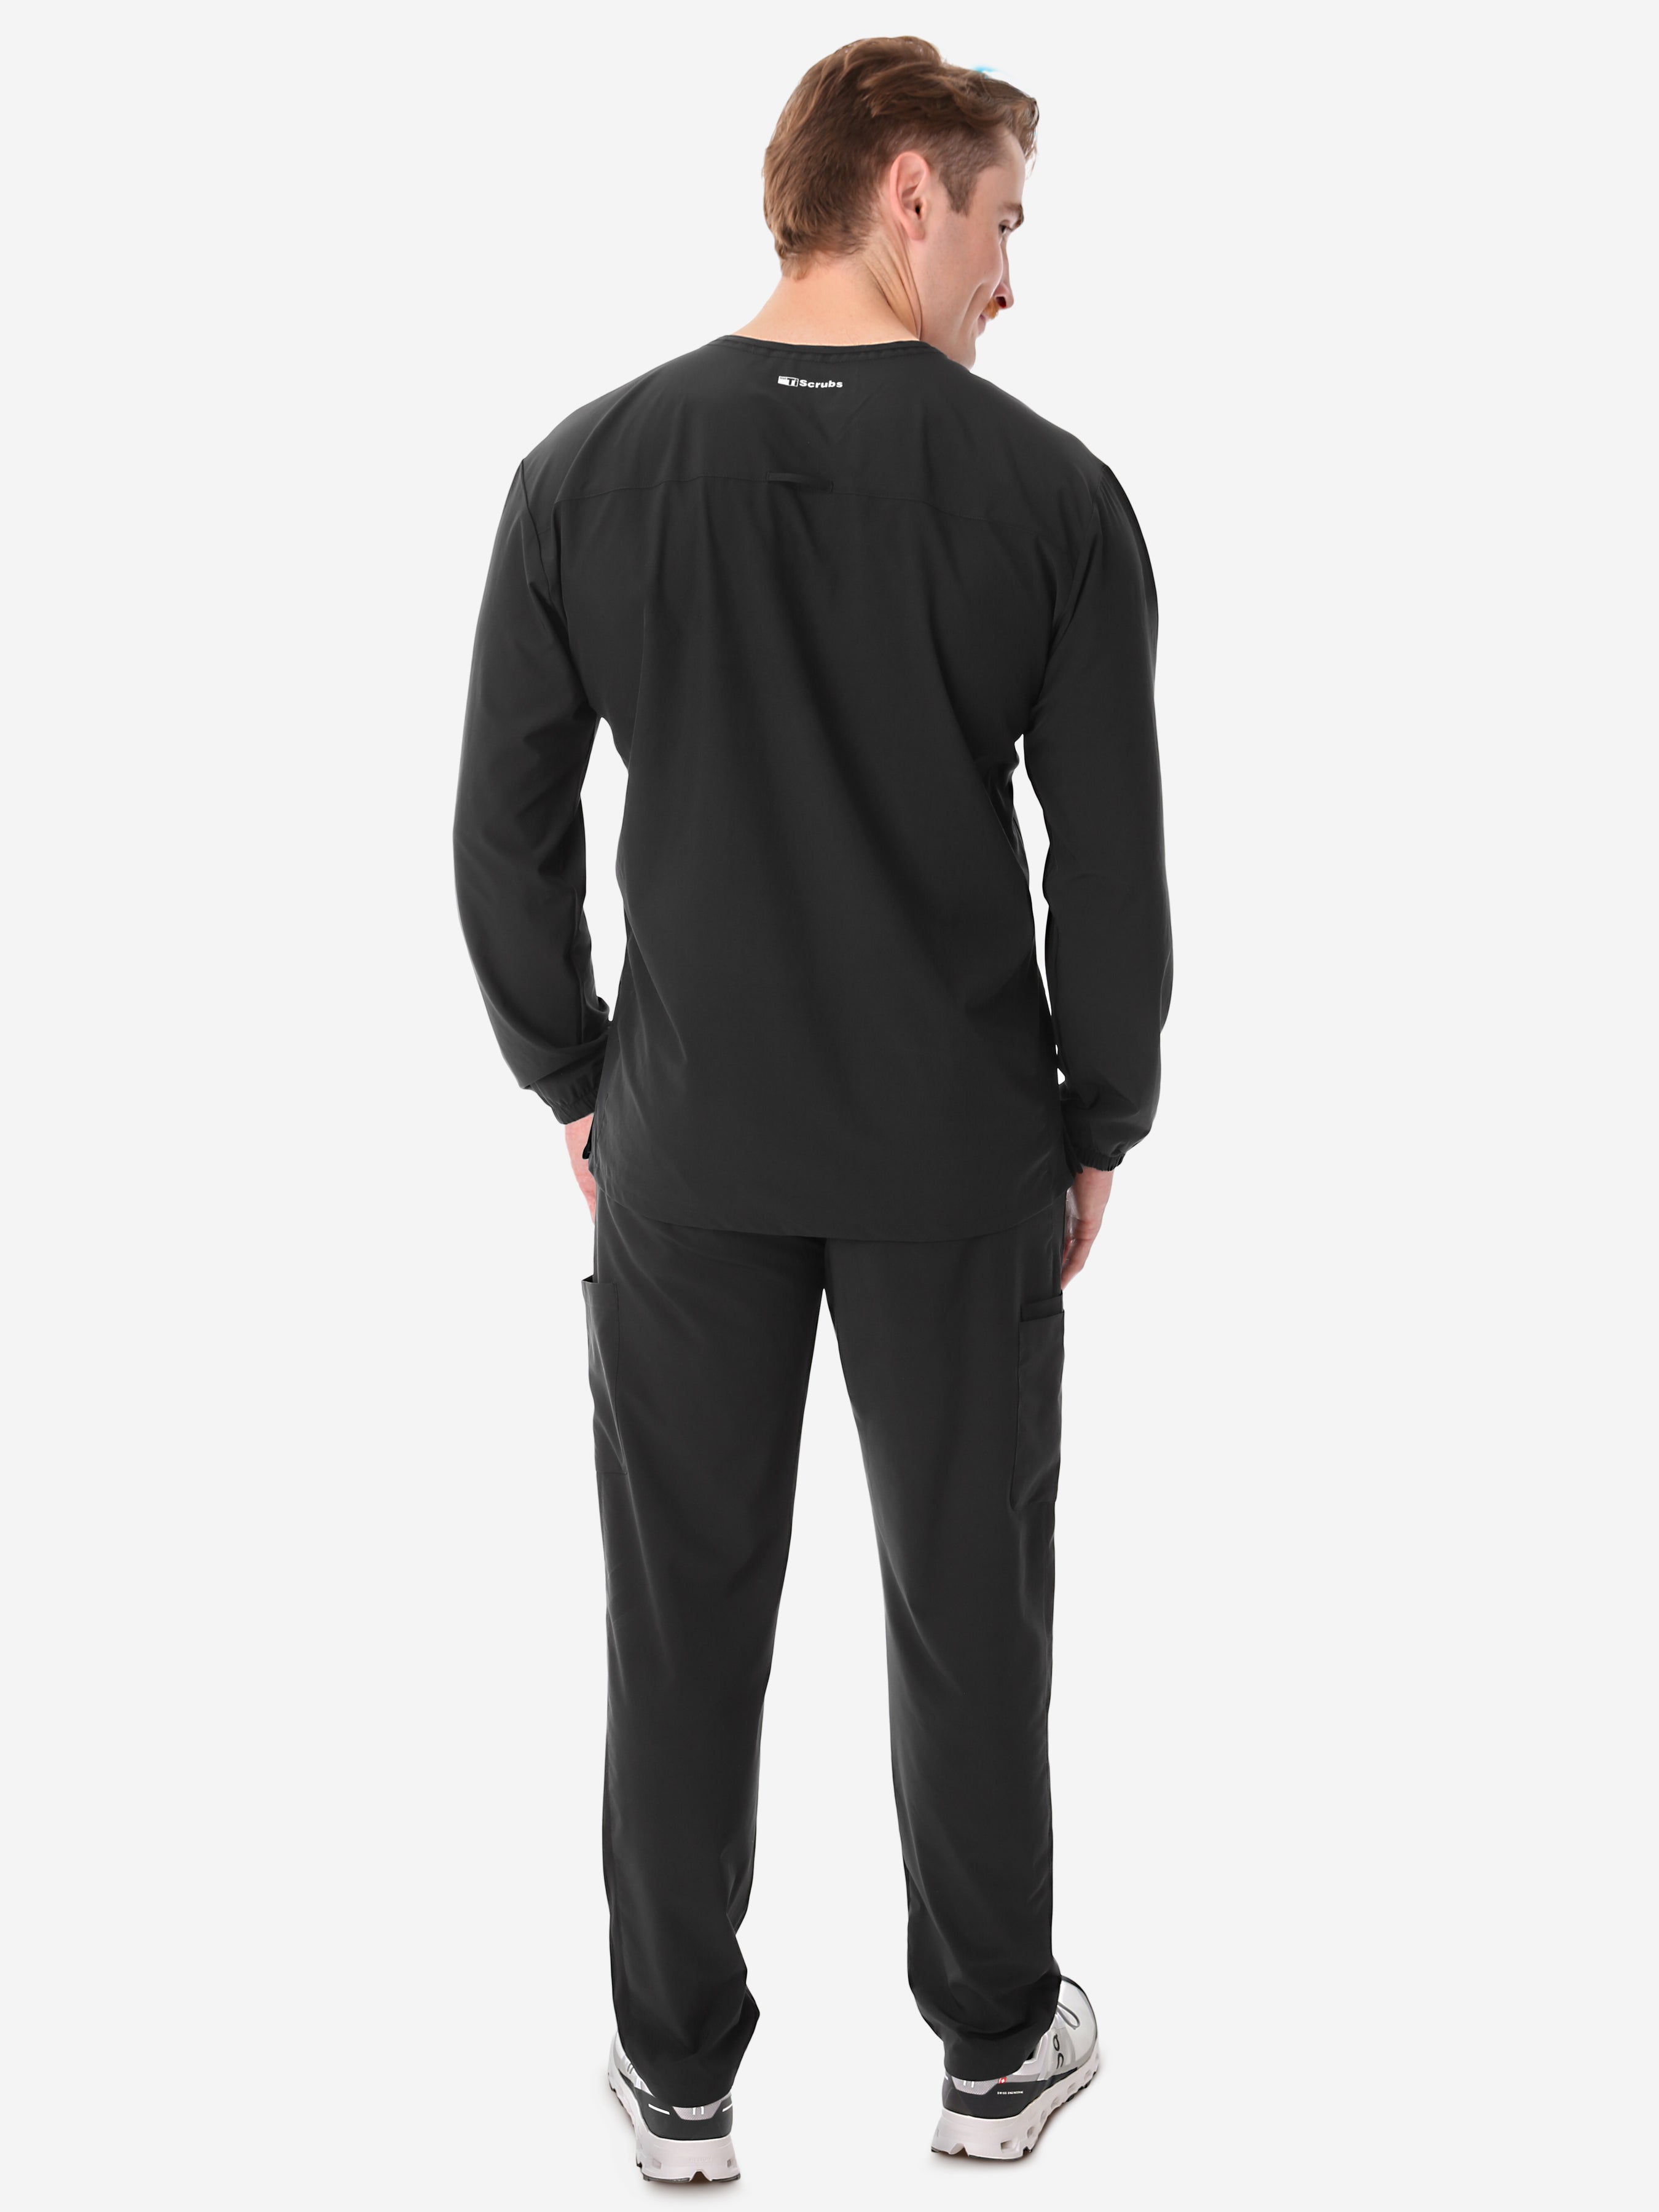 Men&#39;s Long Sleeve Scrub Top with Two Chest Pockets Real Black Full Body Back View